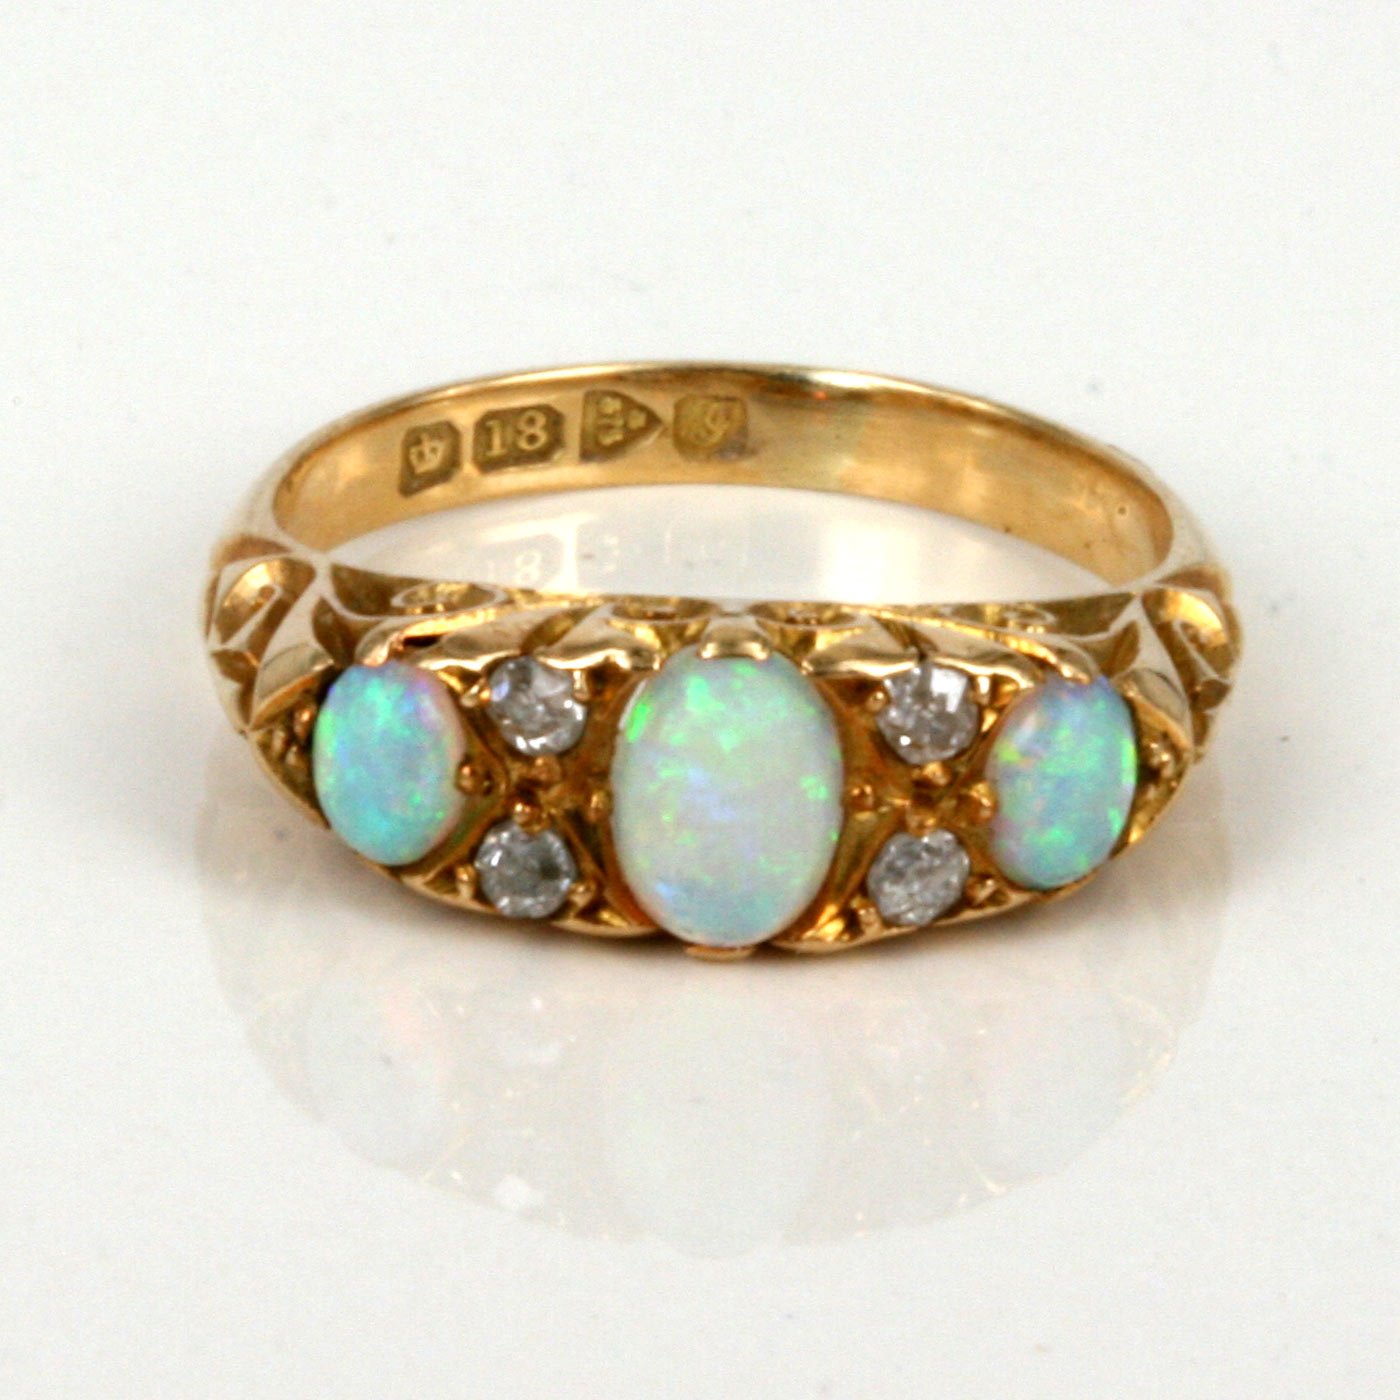 Buy Antique opal and diamond ring made in 1909. Sold Items, Sold Rings